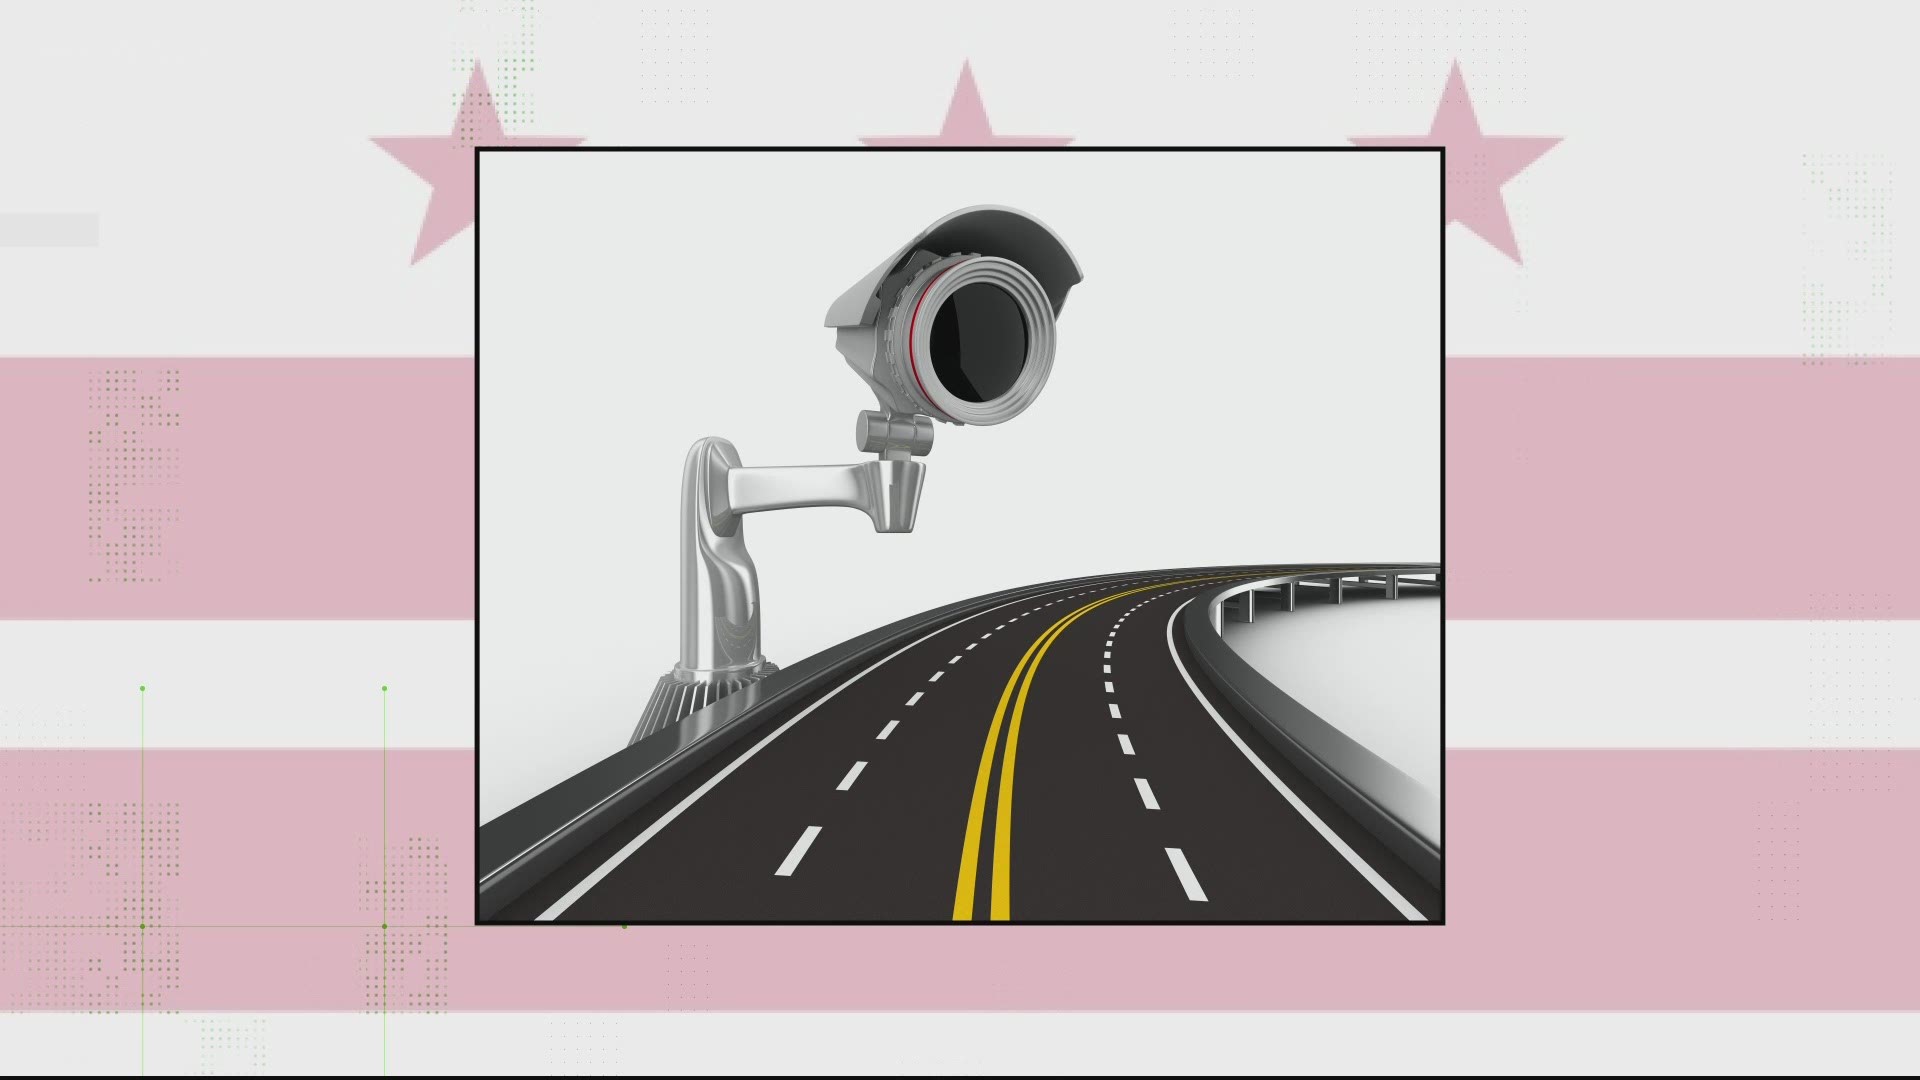 Yes, in D.C. and some Maryland counties, speed cameras in school zones have been functioning despite classes meeting virtually.